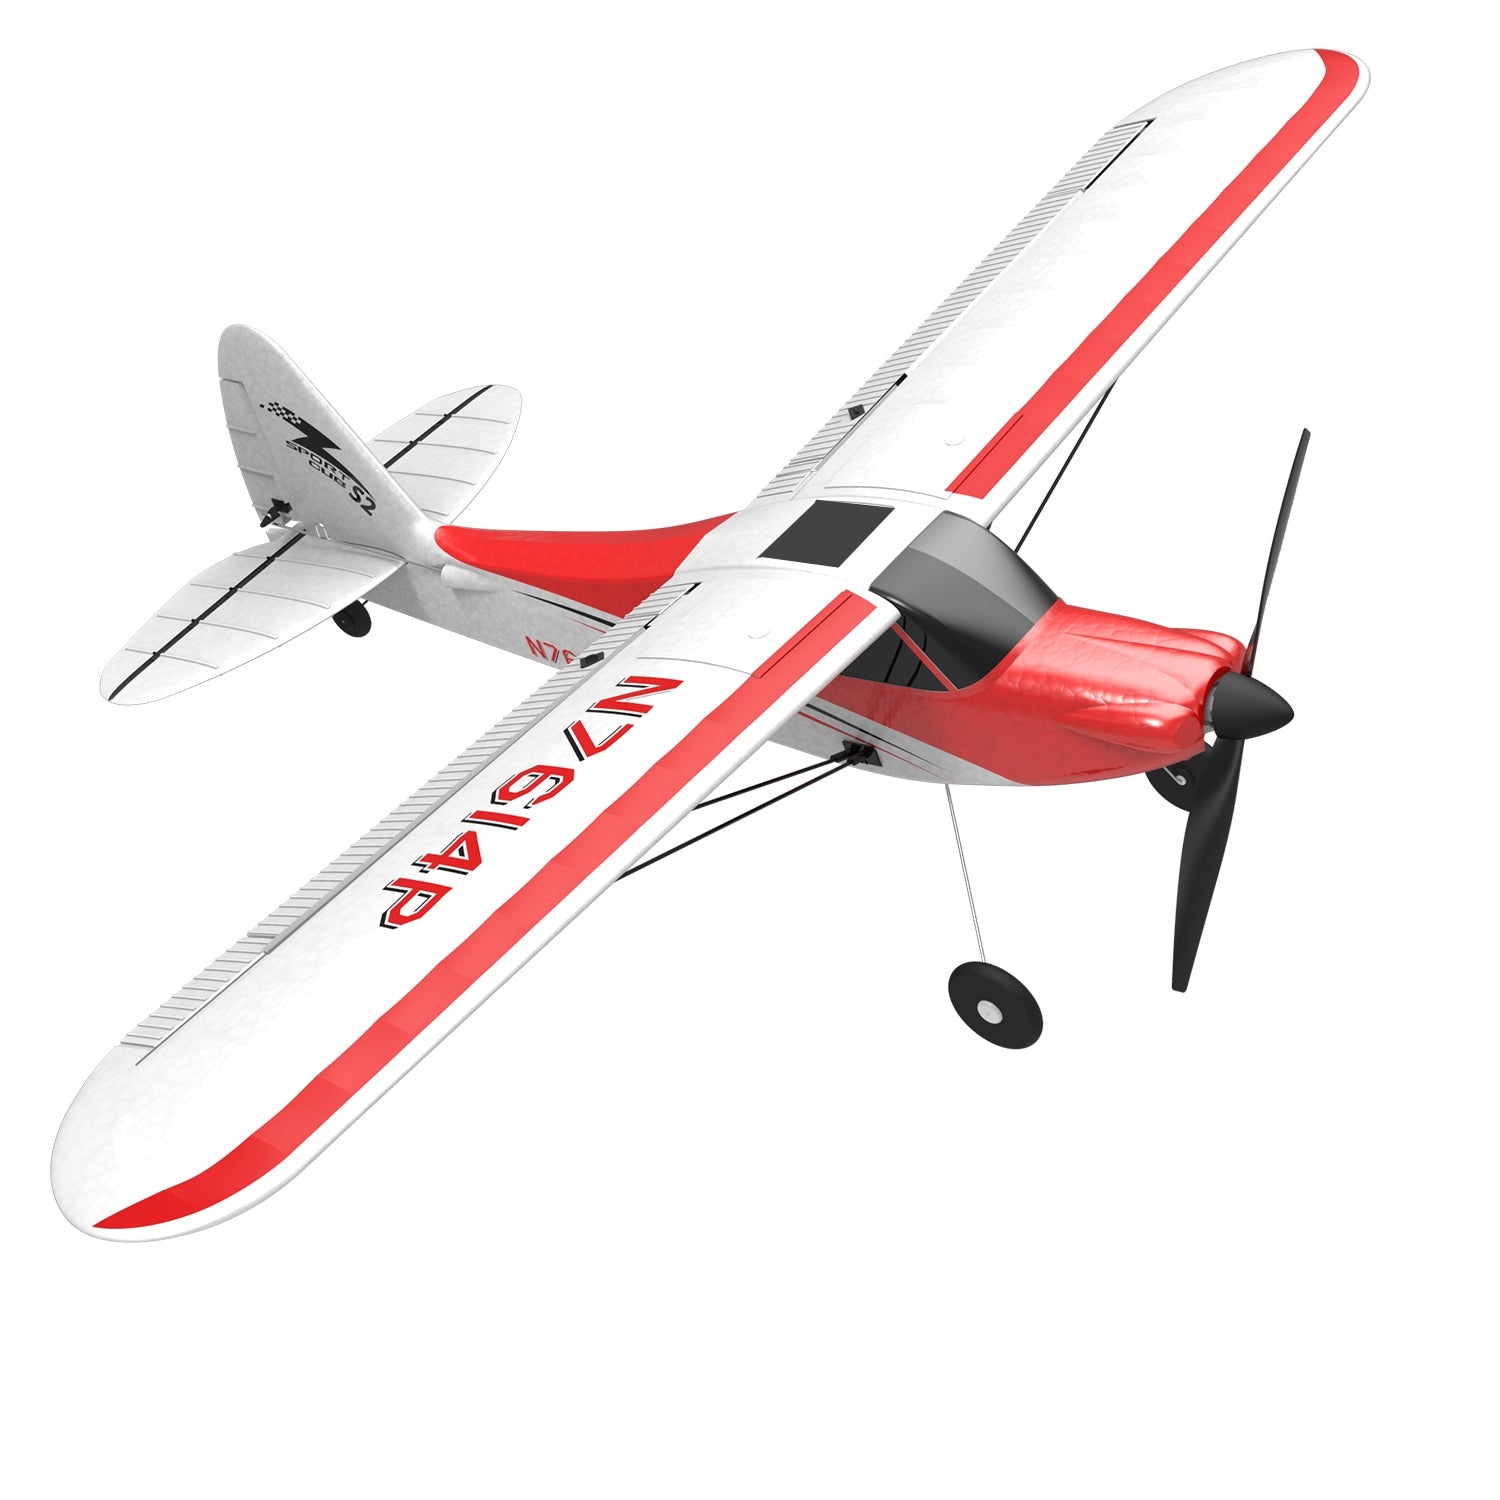 VOLANTEXRC Sport Cub Park flyer 4ch RC Trainer Airplane with Gyro Stabilizer Easy to Fly